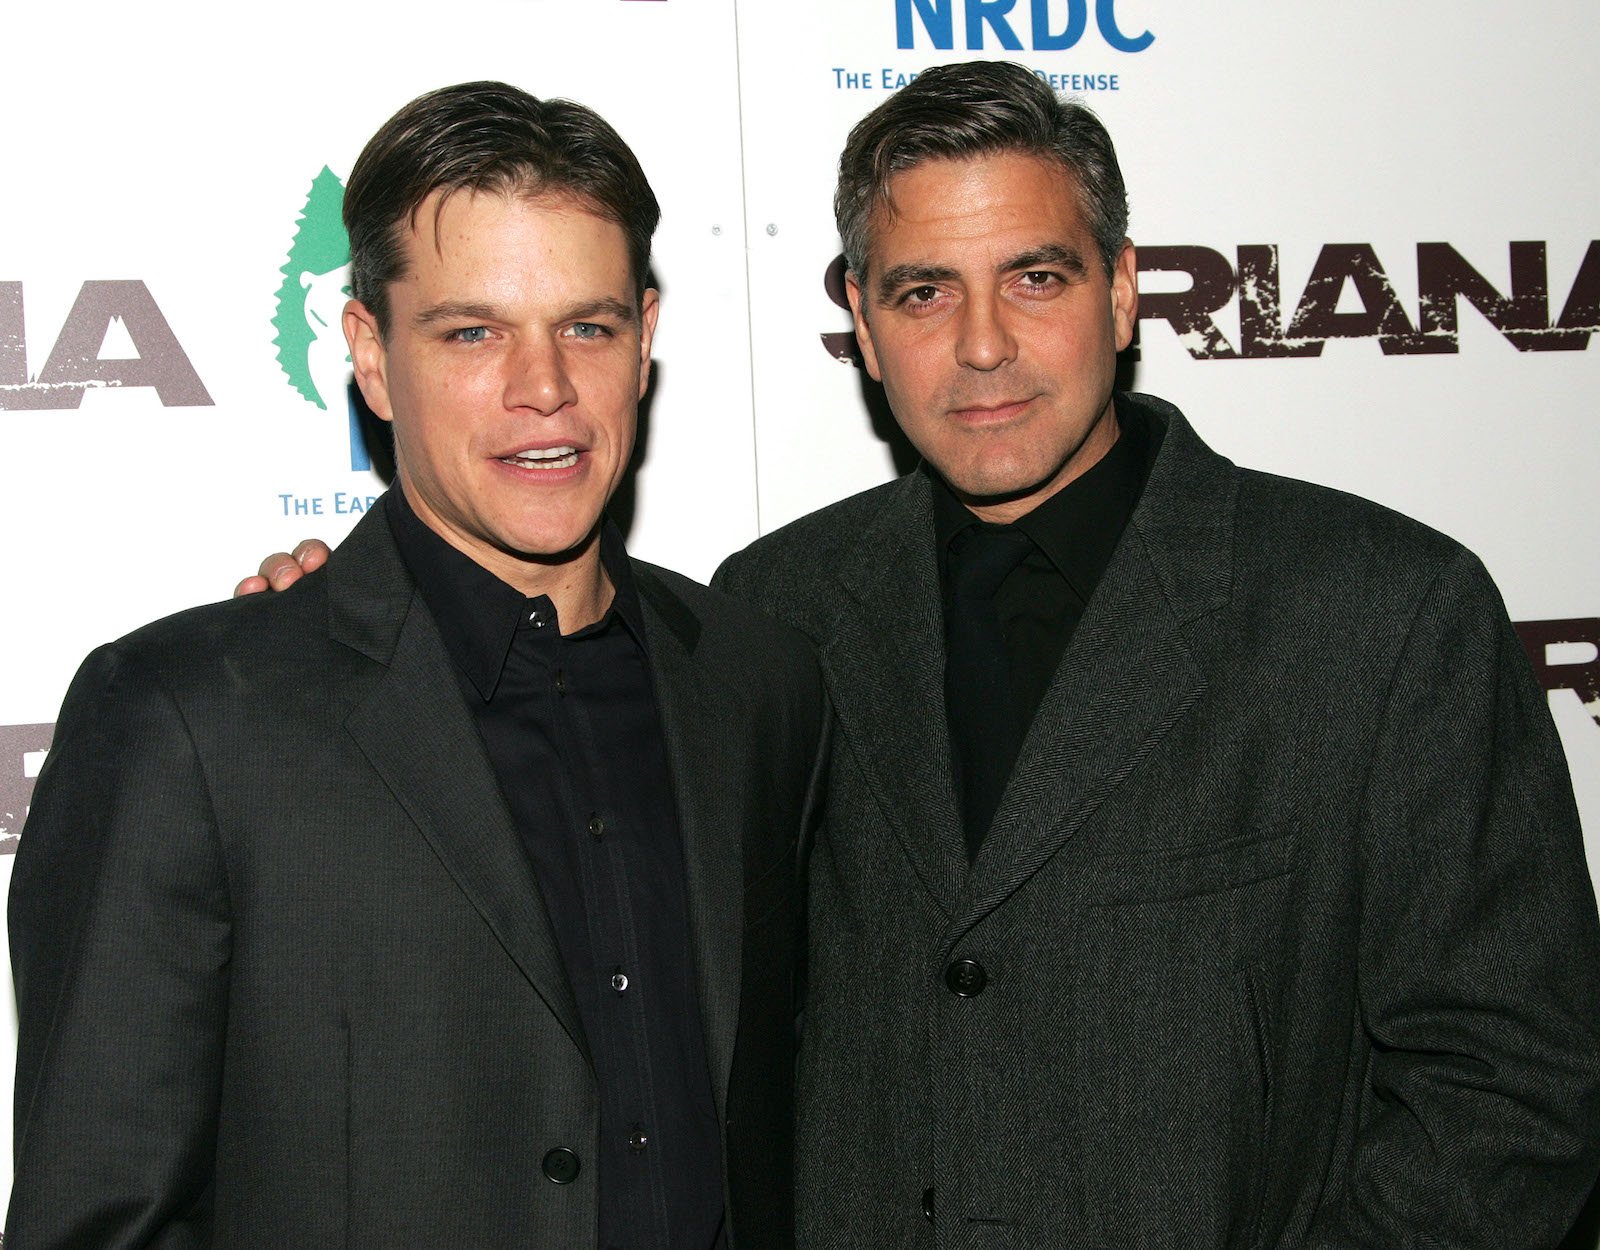 Matt Damon and George Clooney at the premiere of 'Syriana'